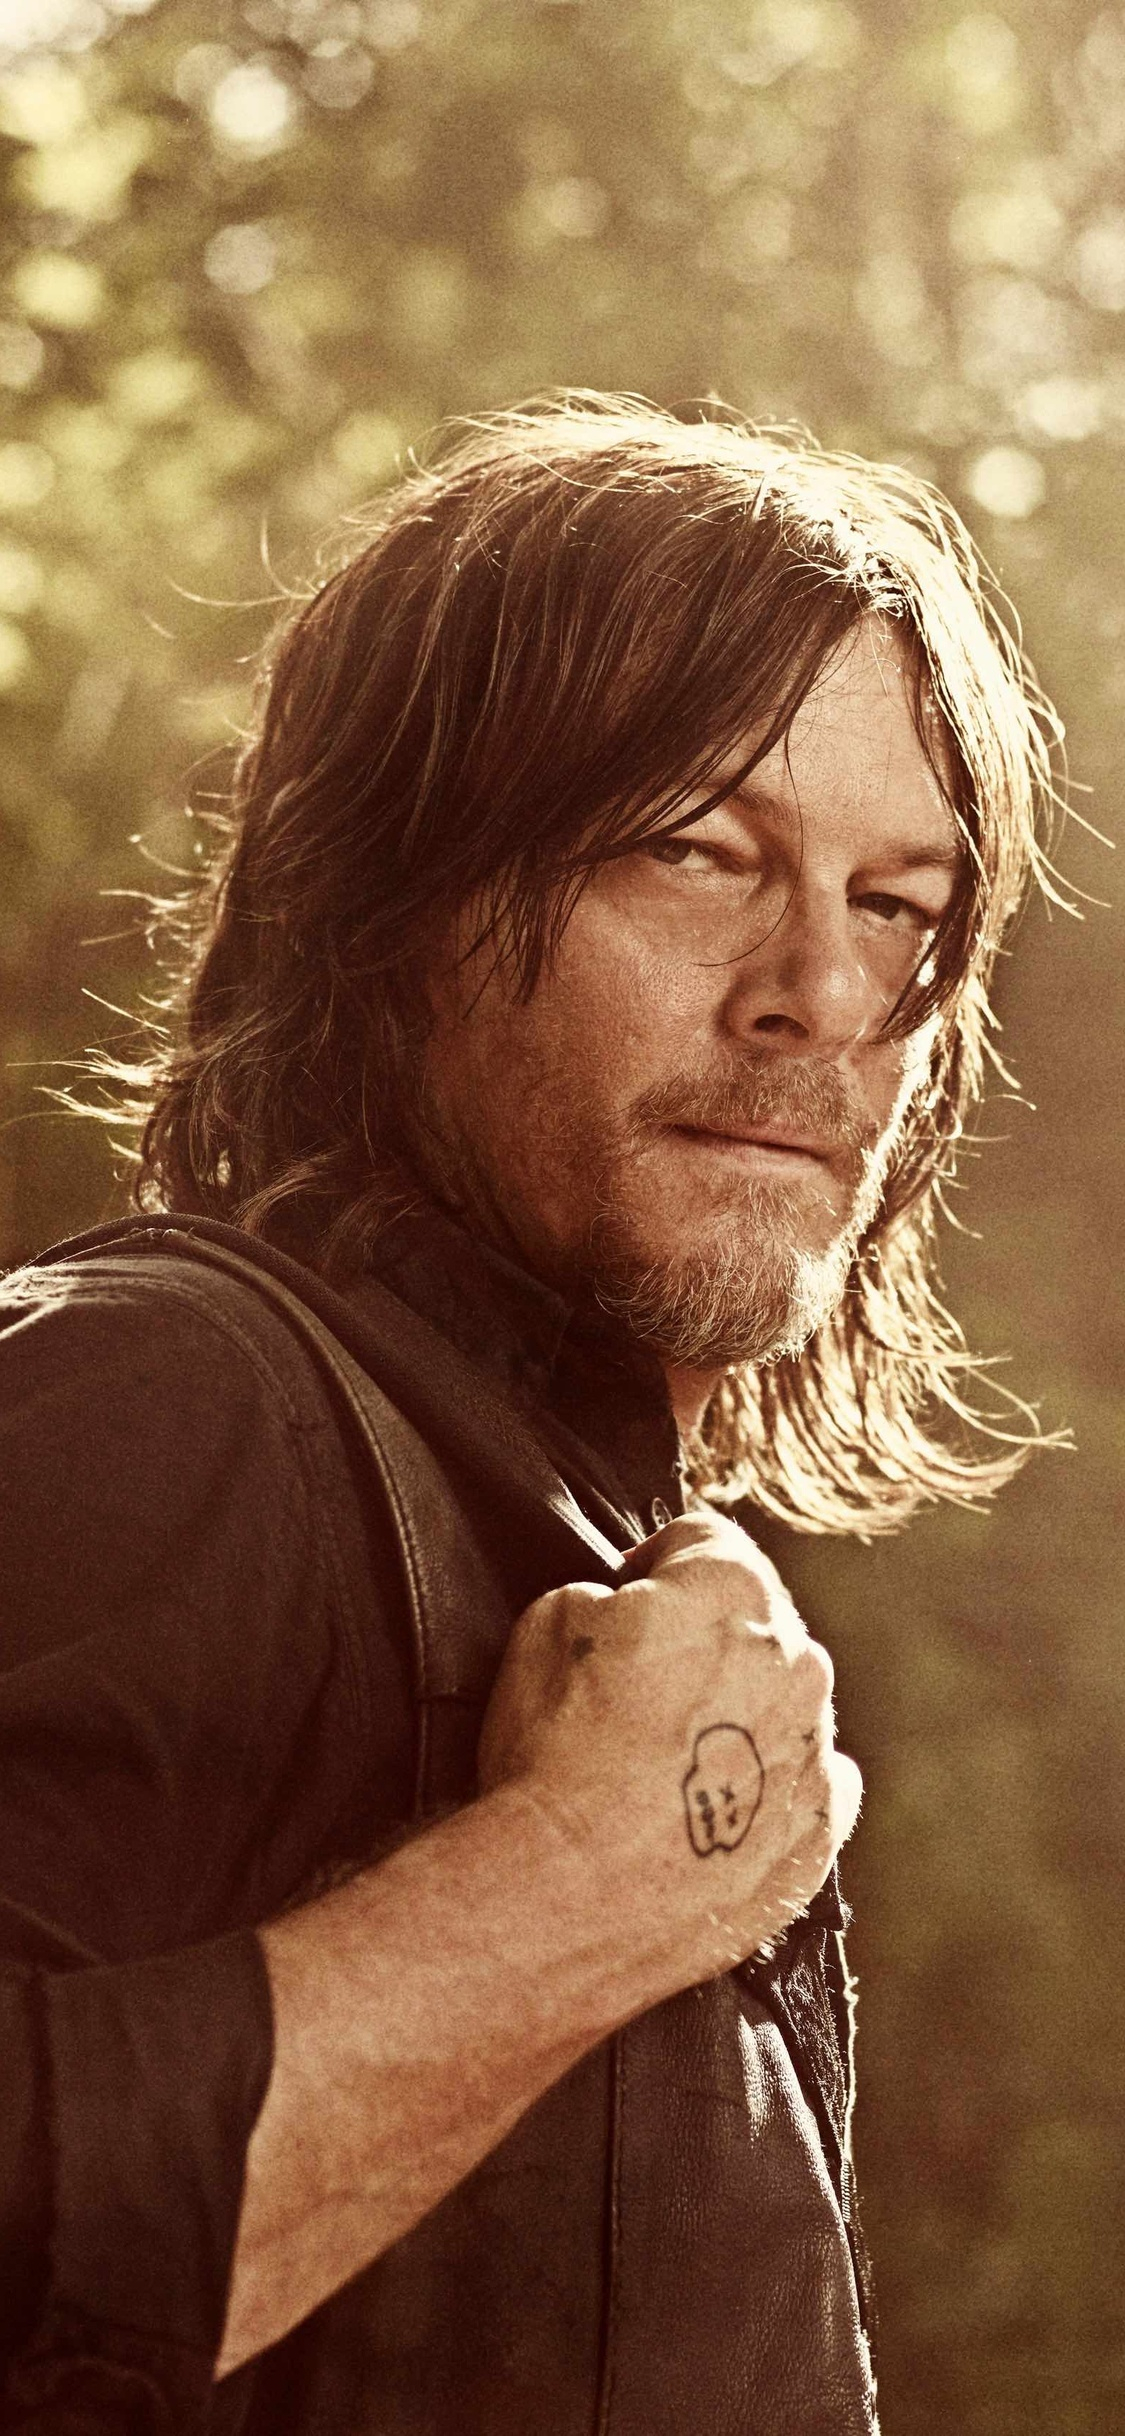 1125x2436 The Walking Dead Season 8 2018 Norman Reedus Iphone XS,Iphone 10,Iphone X HD 4k Wallpapers, Images, Backgrounds, Photos and Pictures